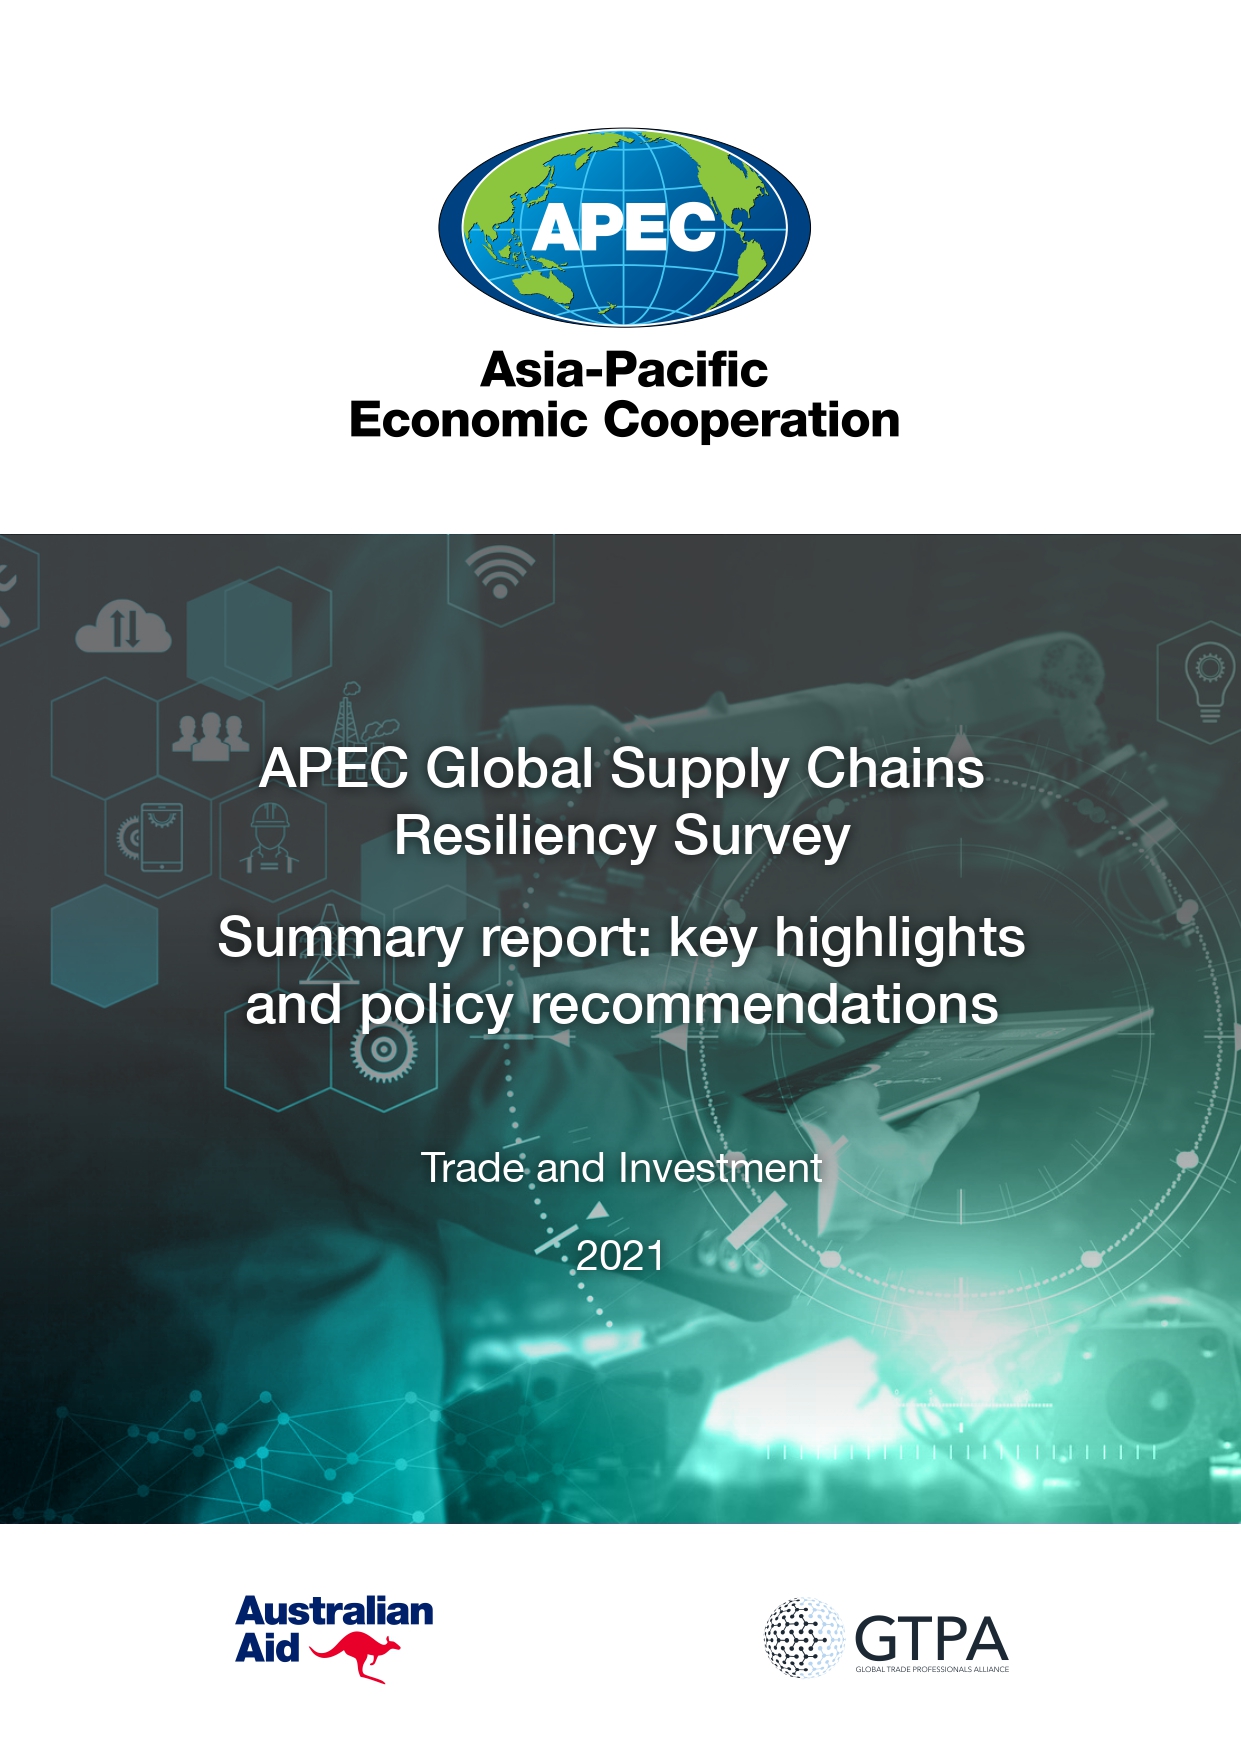 APEC Global Supply Chains Large Business Survey report